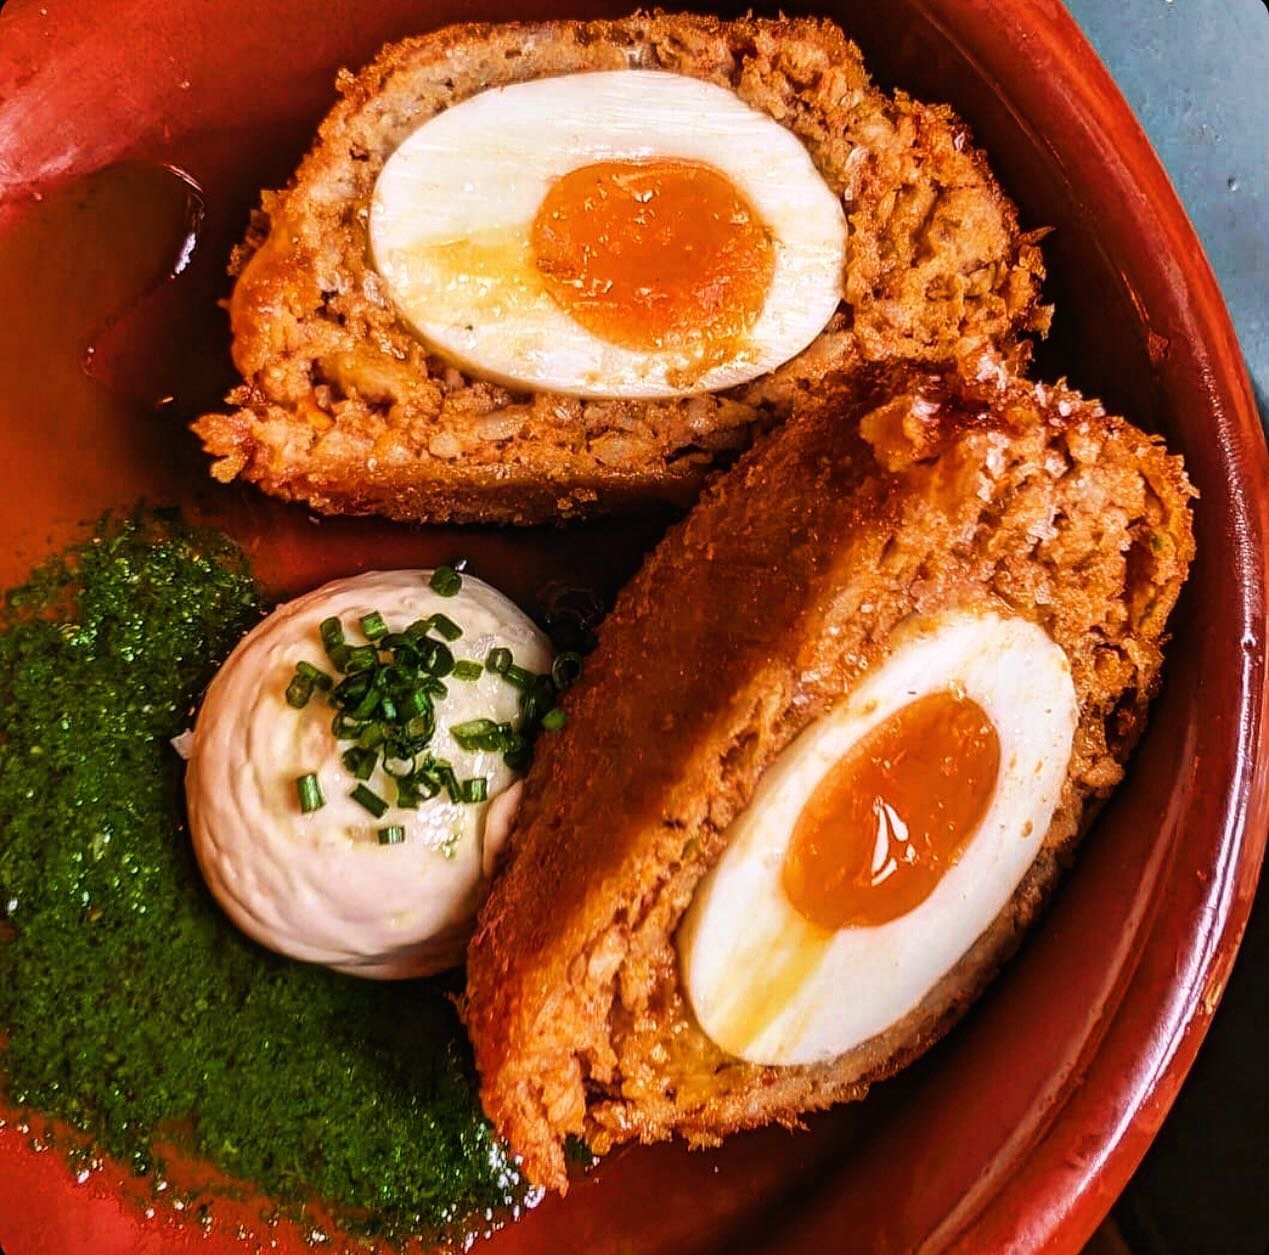 -𝙃𝘼𝙋𝙋𝙔 𝙀𝘼𝙎𝙏𝙀𝙍-

Hope you&rsquo;re all having a great bank holiday weekend. We are looking forward to seeing you all. We have some new delicious plates on the menu to try this weekend. And especially for Easter, we have a scotch egg with fr